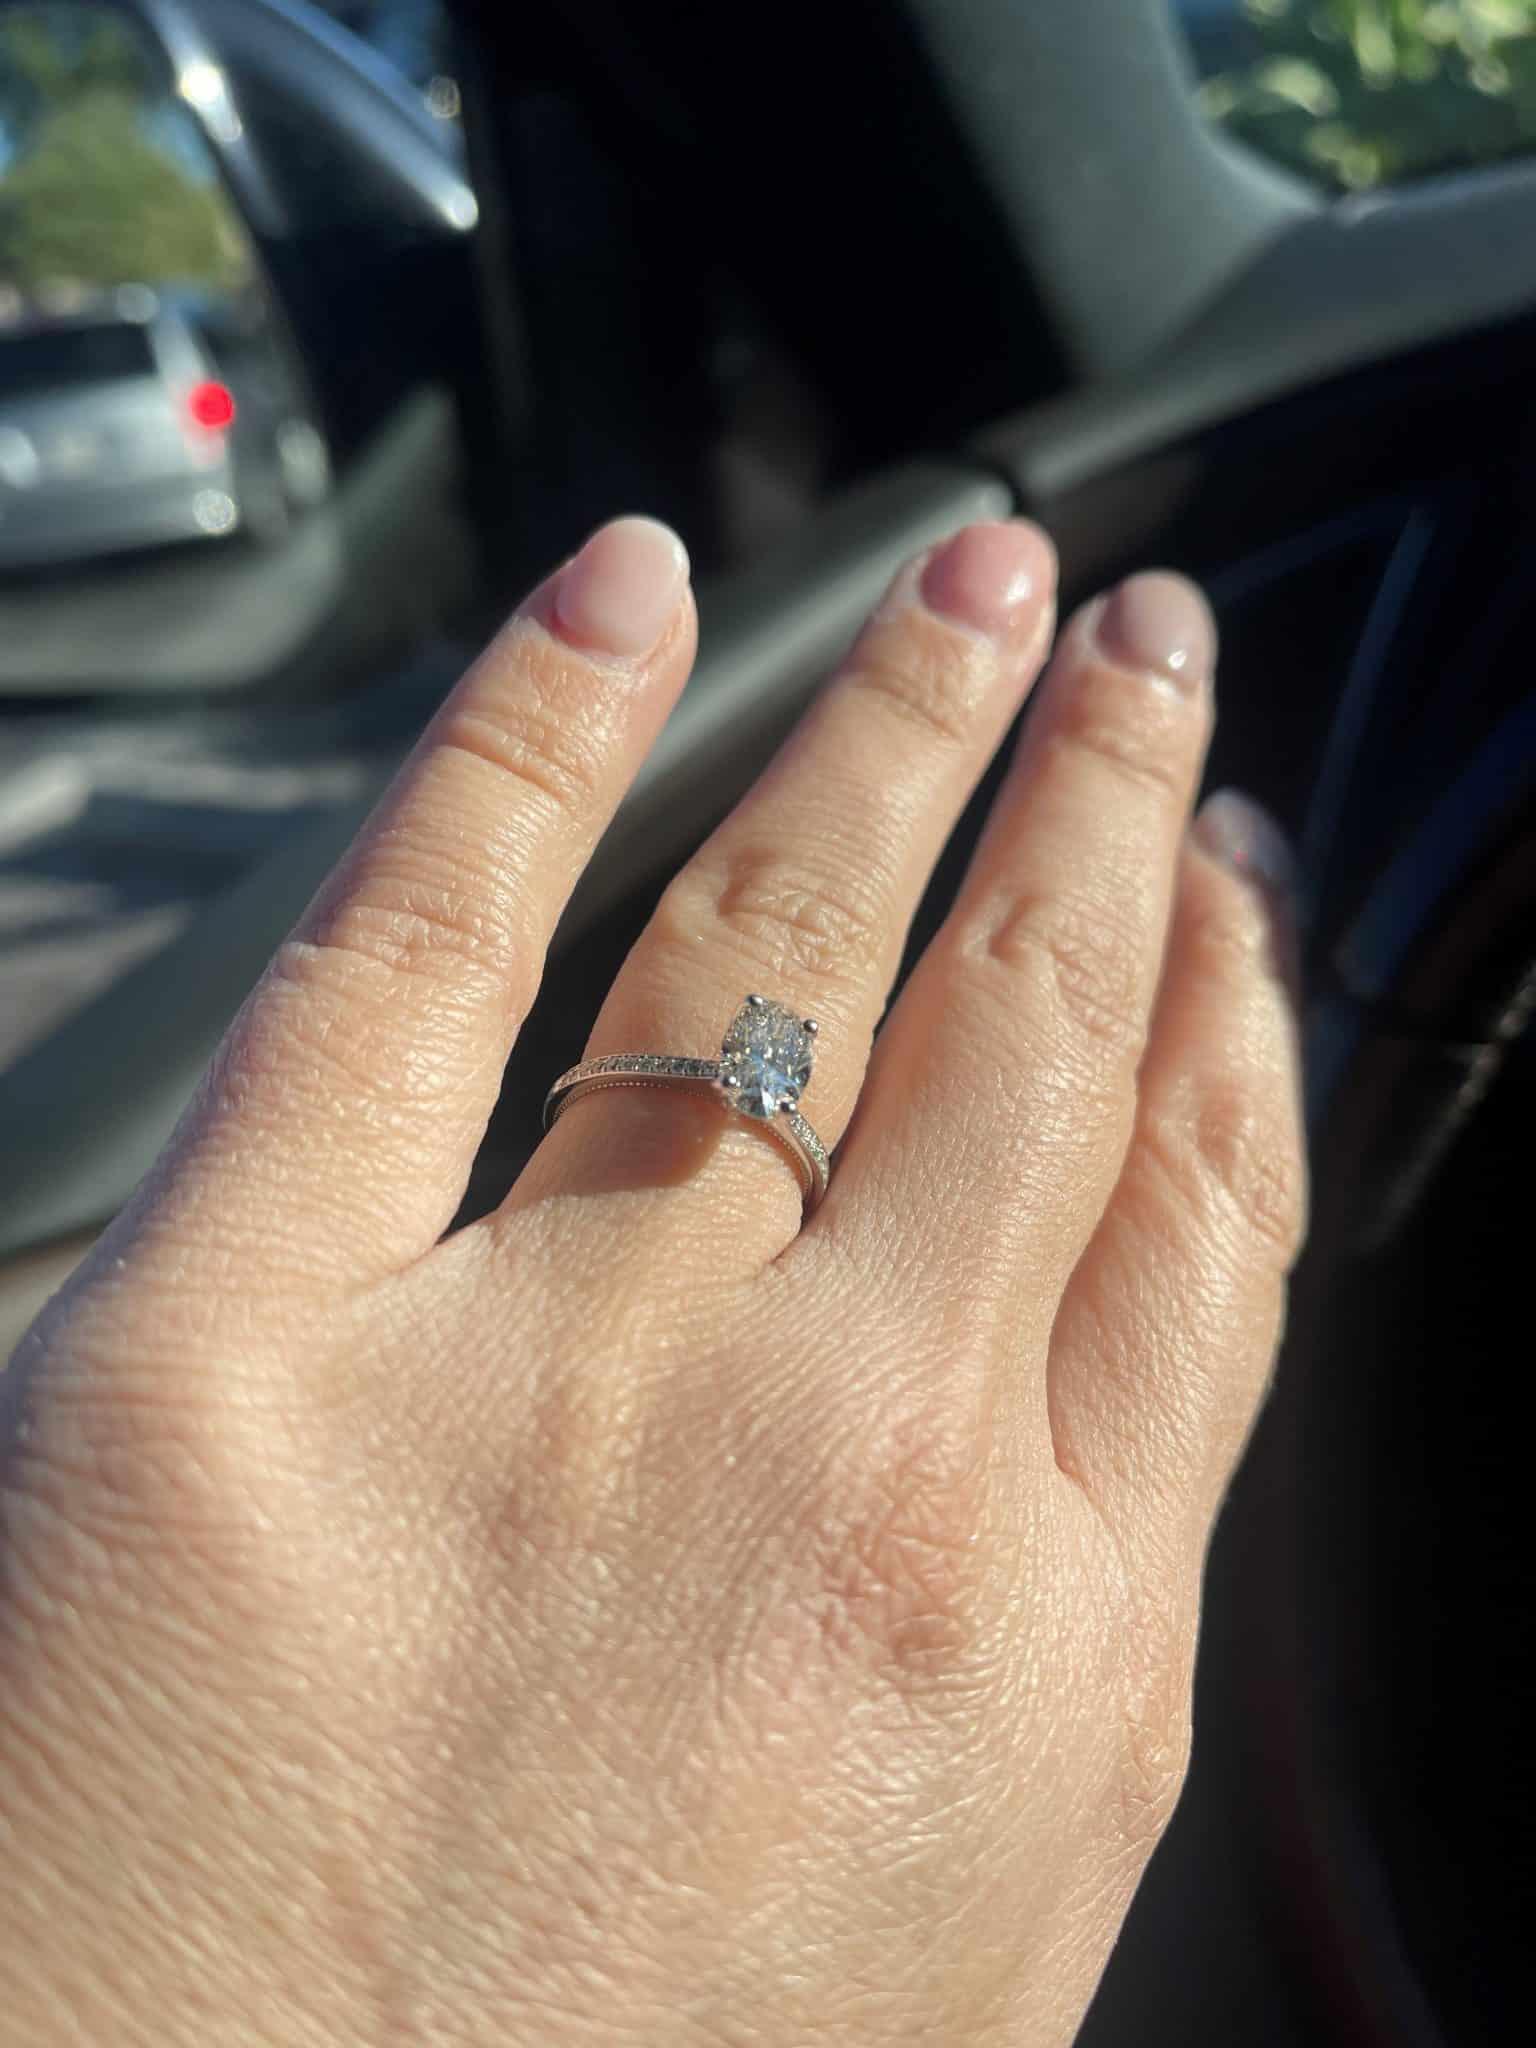 close up image of an engagement ring on a womans hand while in the car